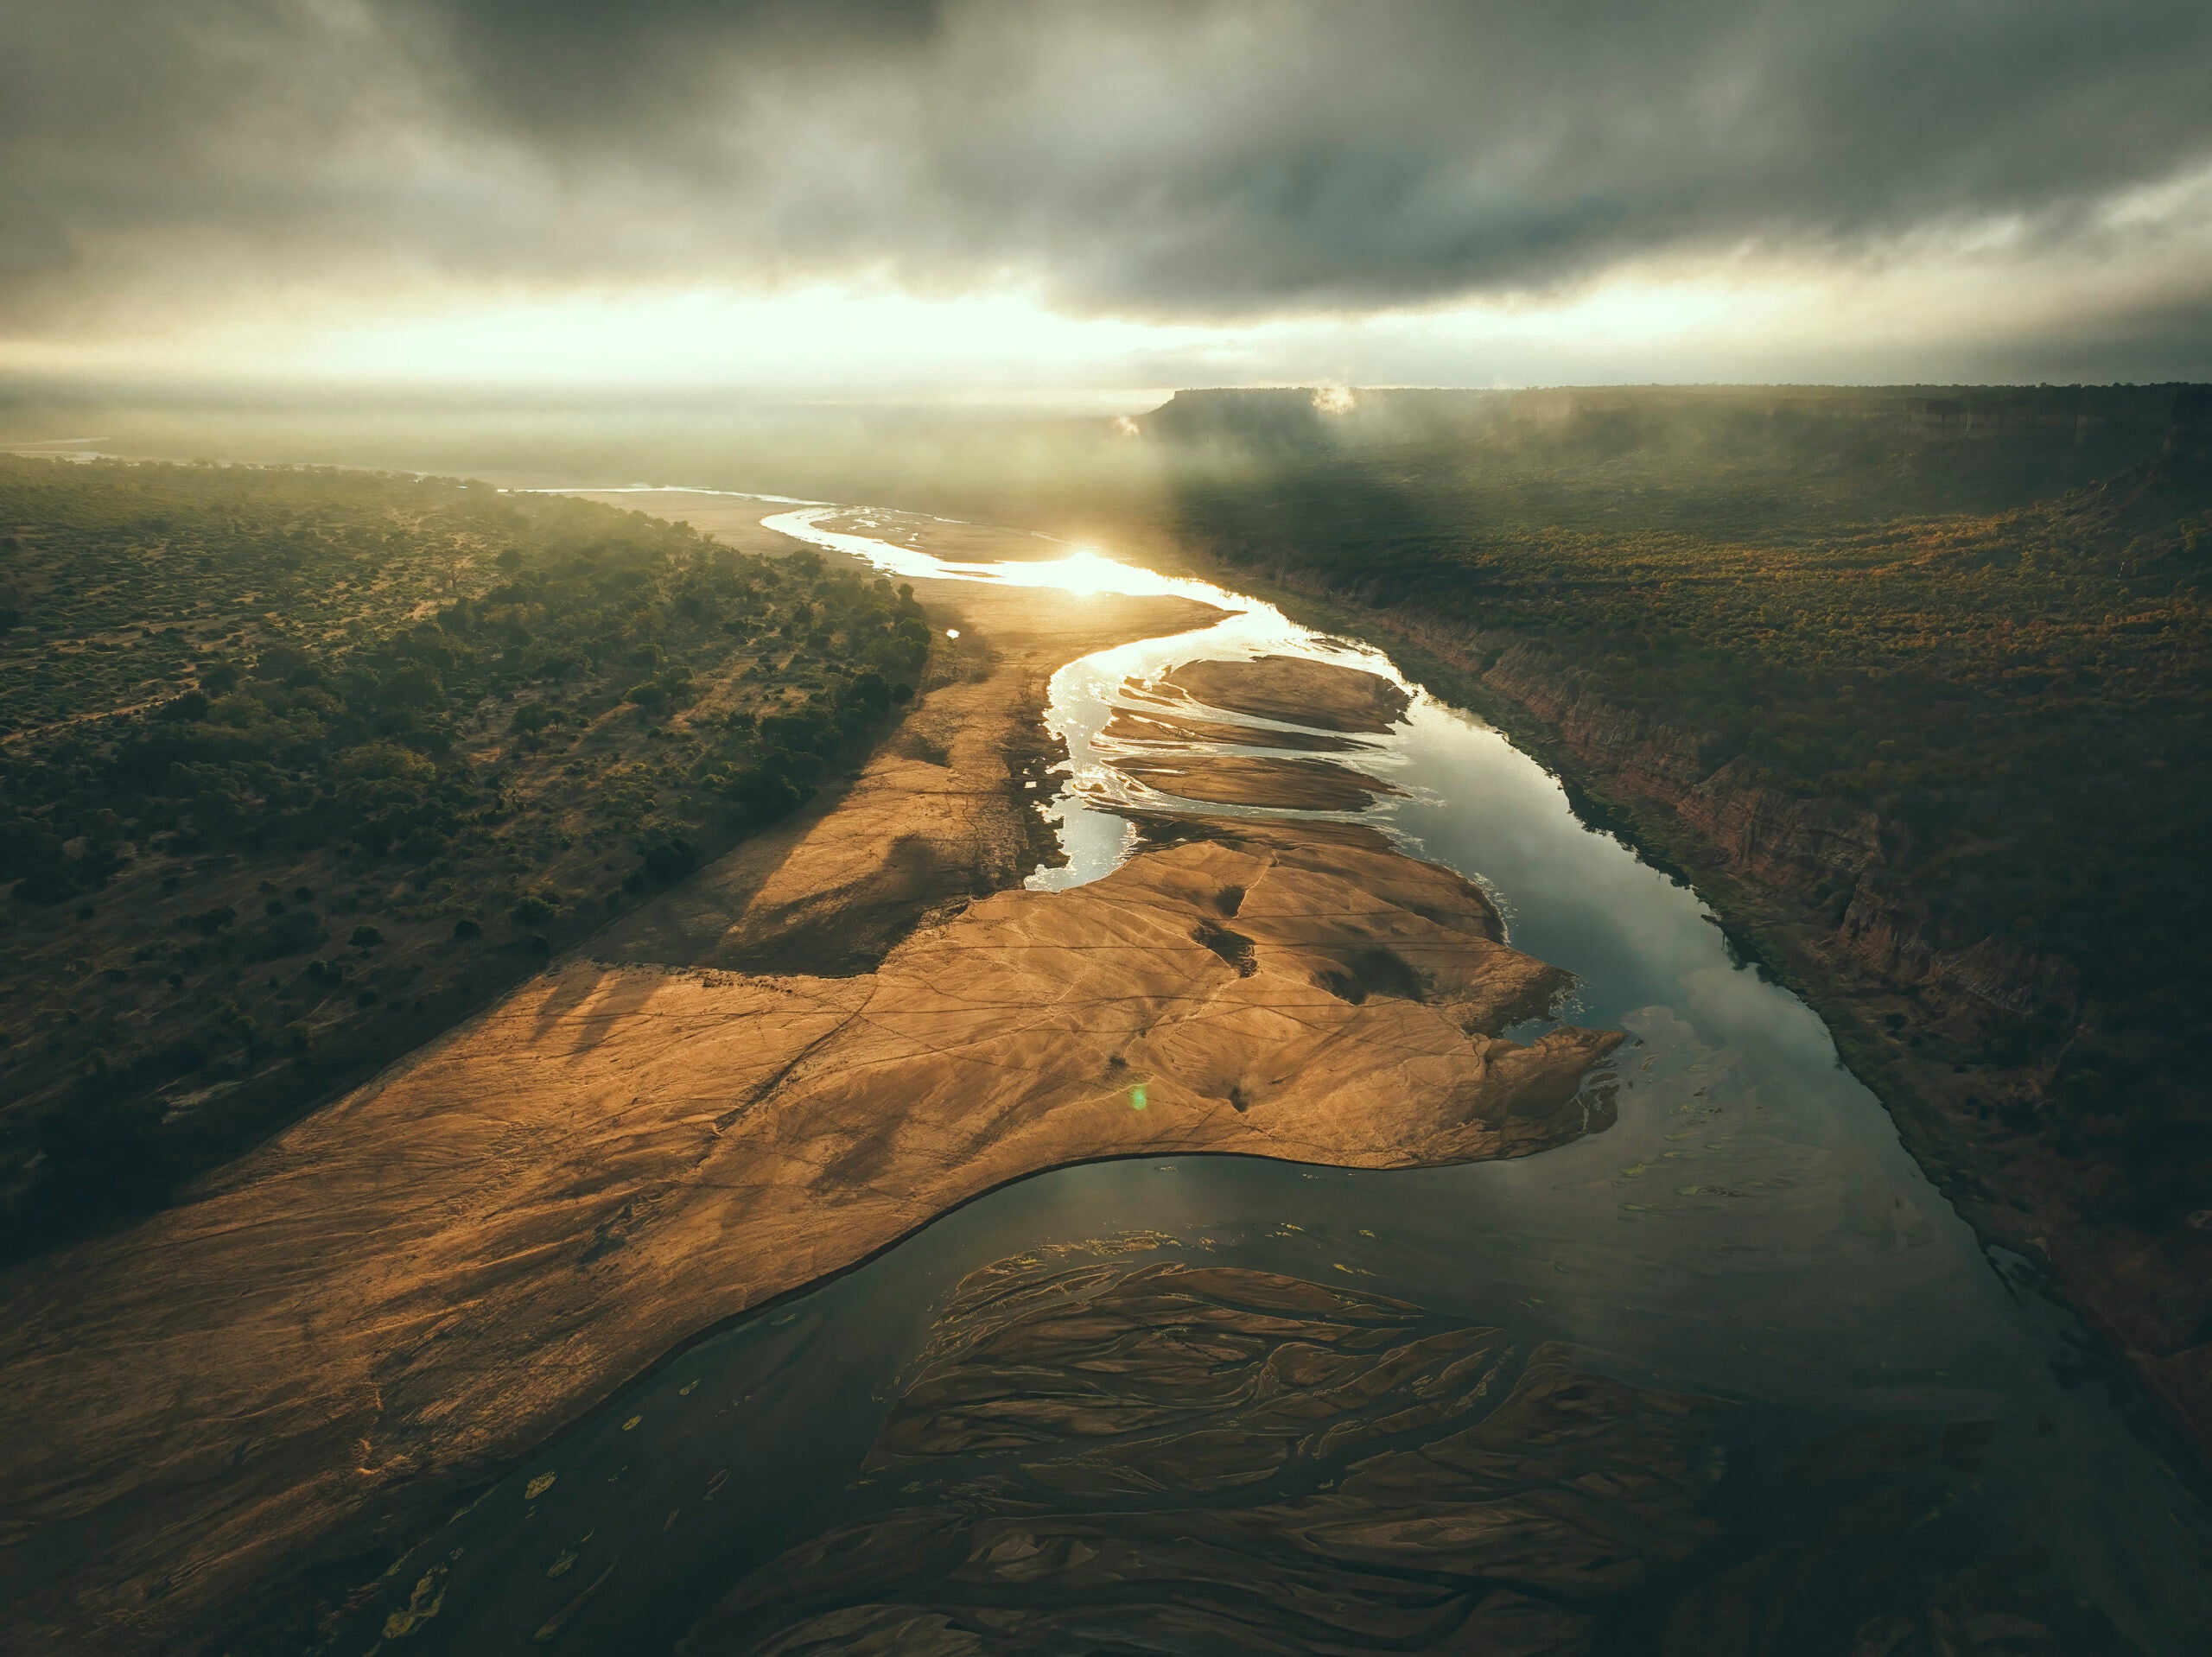 Chilojo Cliffs in Zimbabwe seen from aerial view